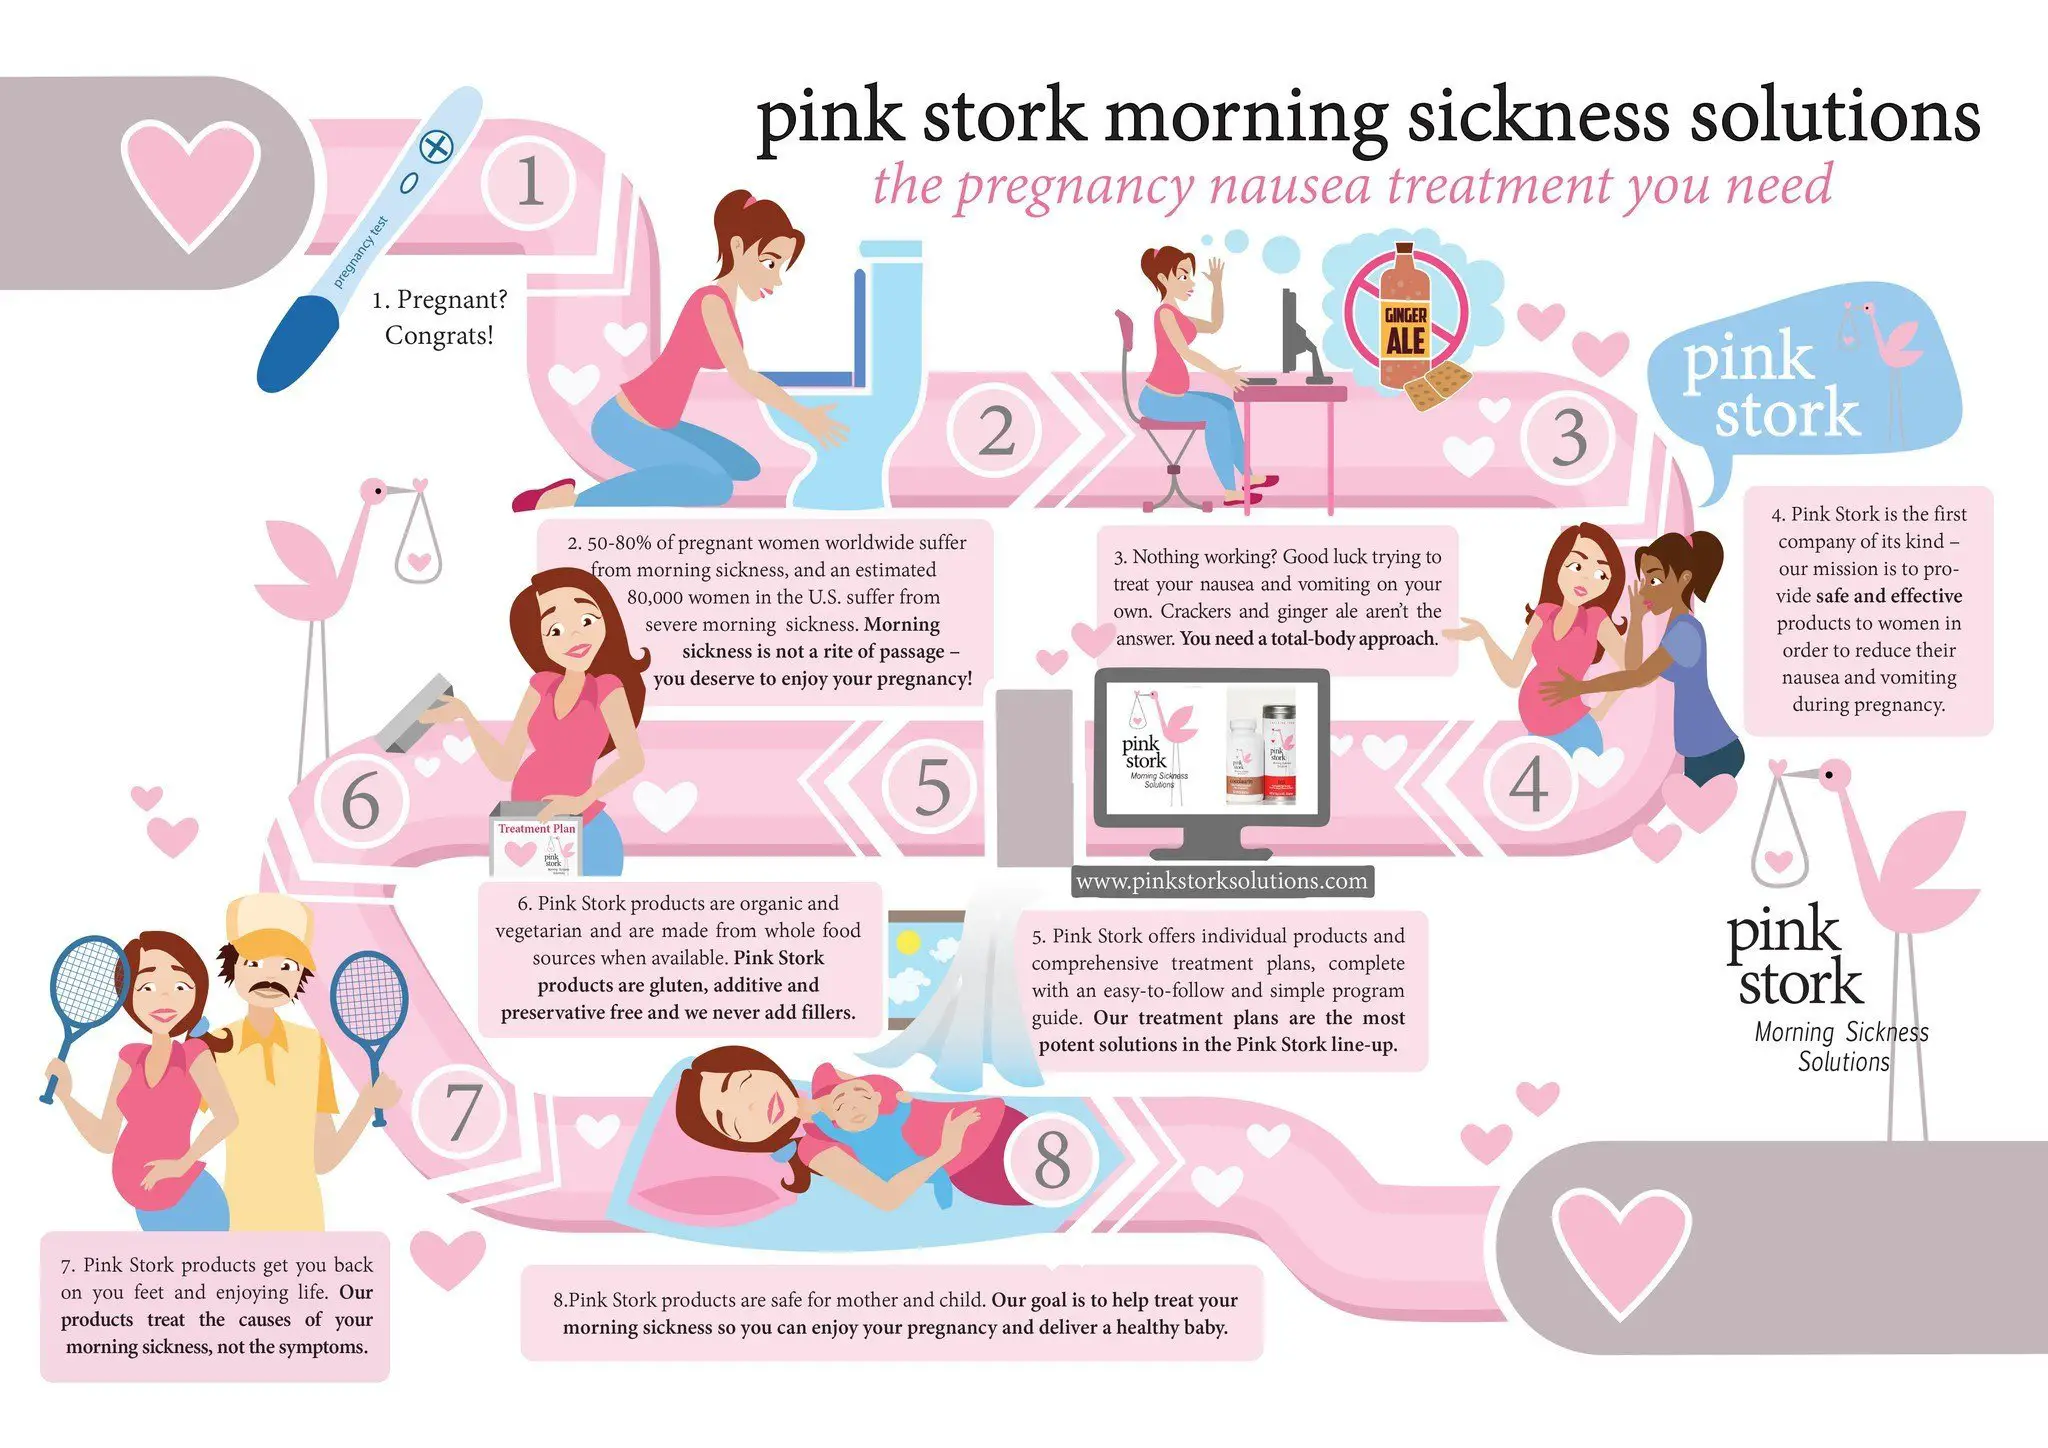 When Does Morning Sickness Start (ALL DAY SICKNESS)